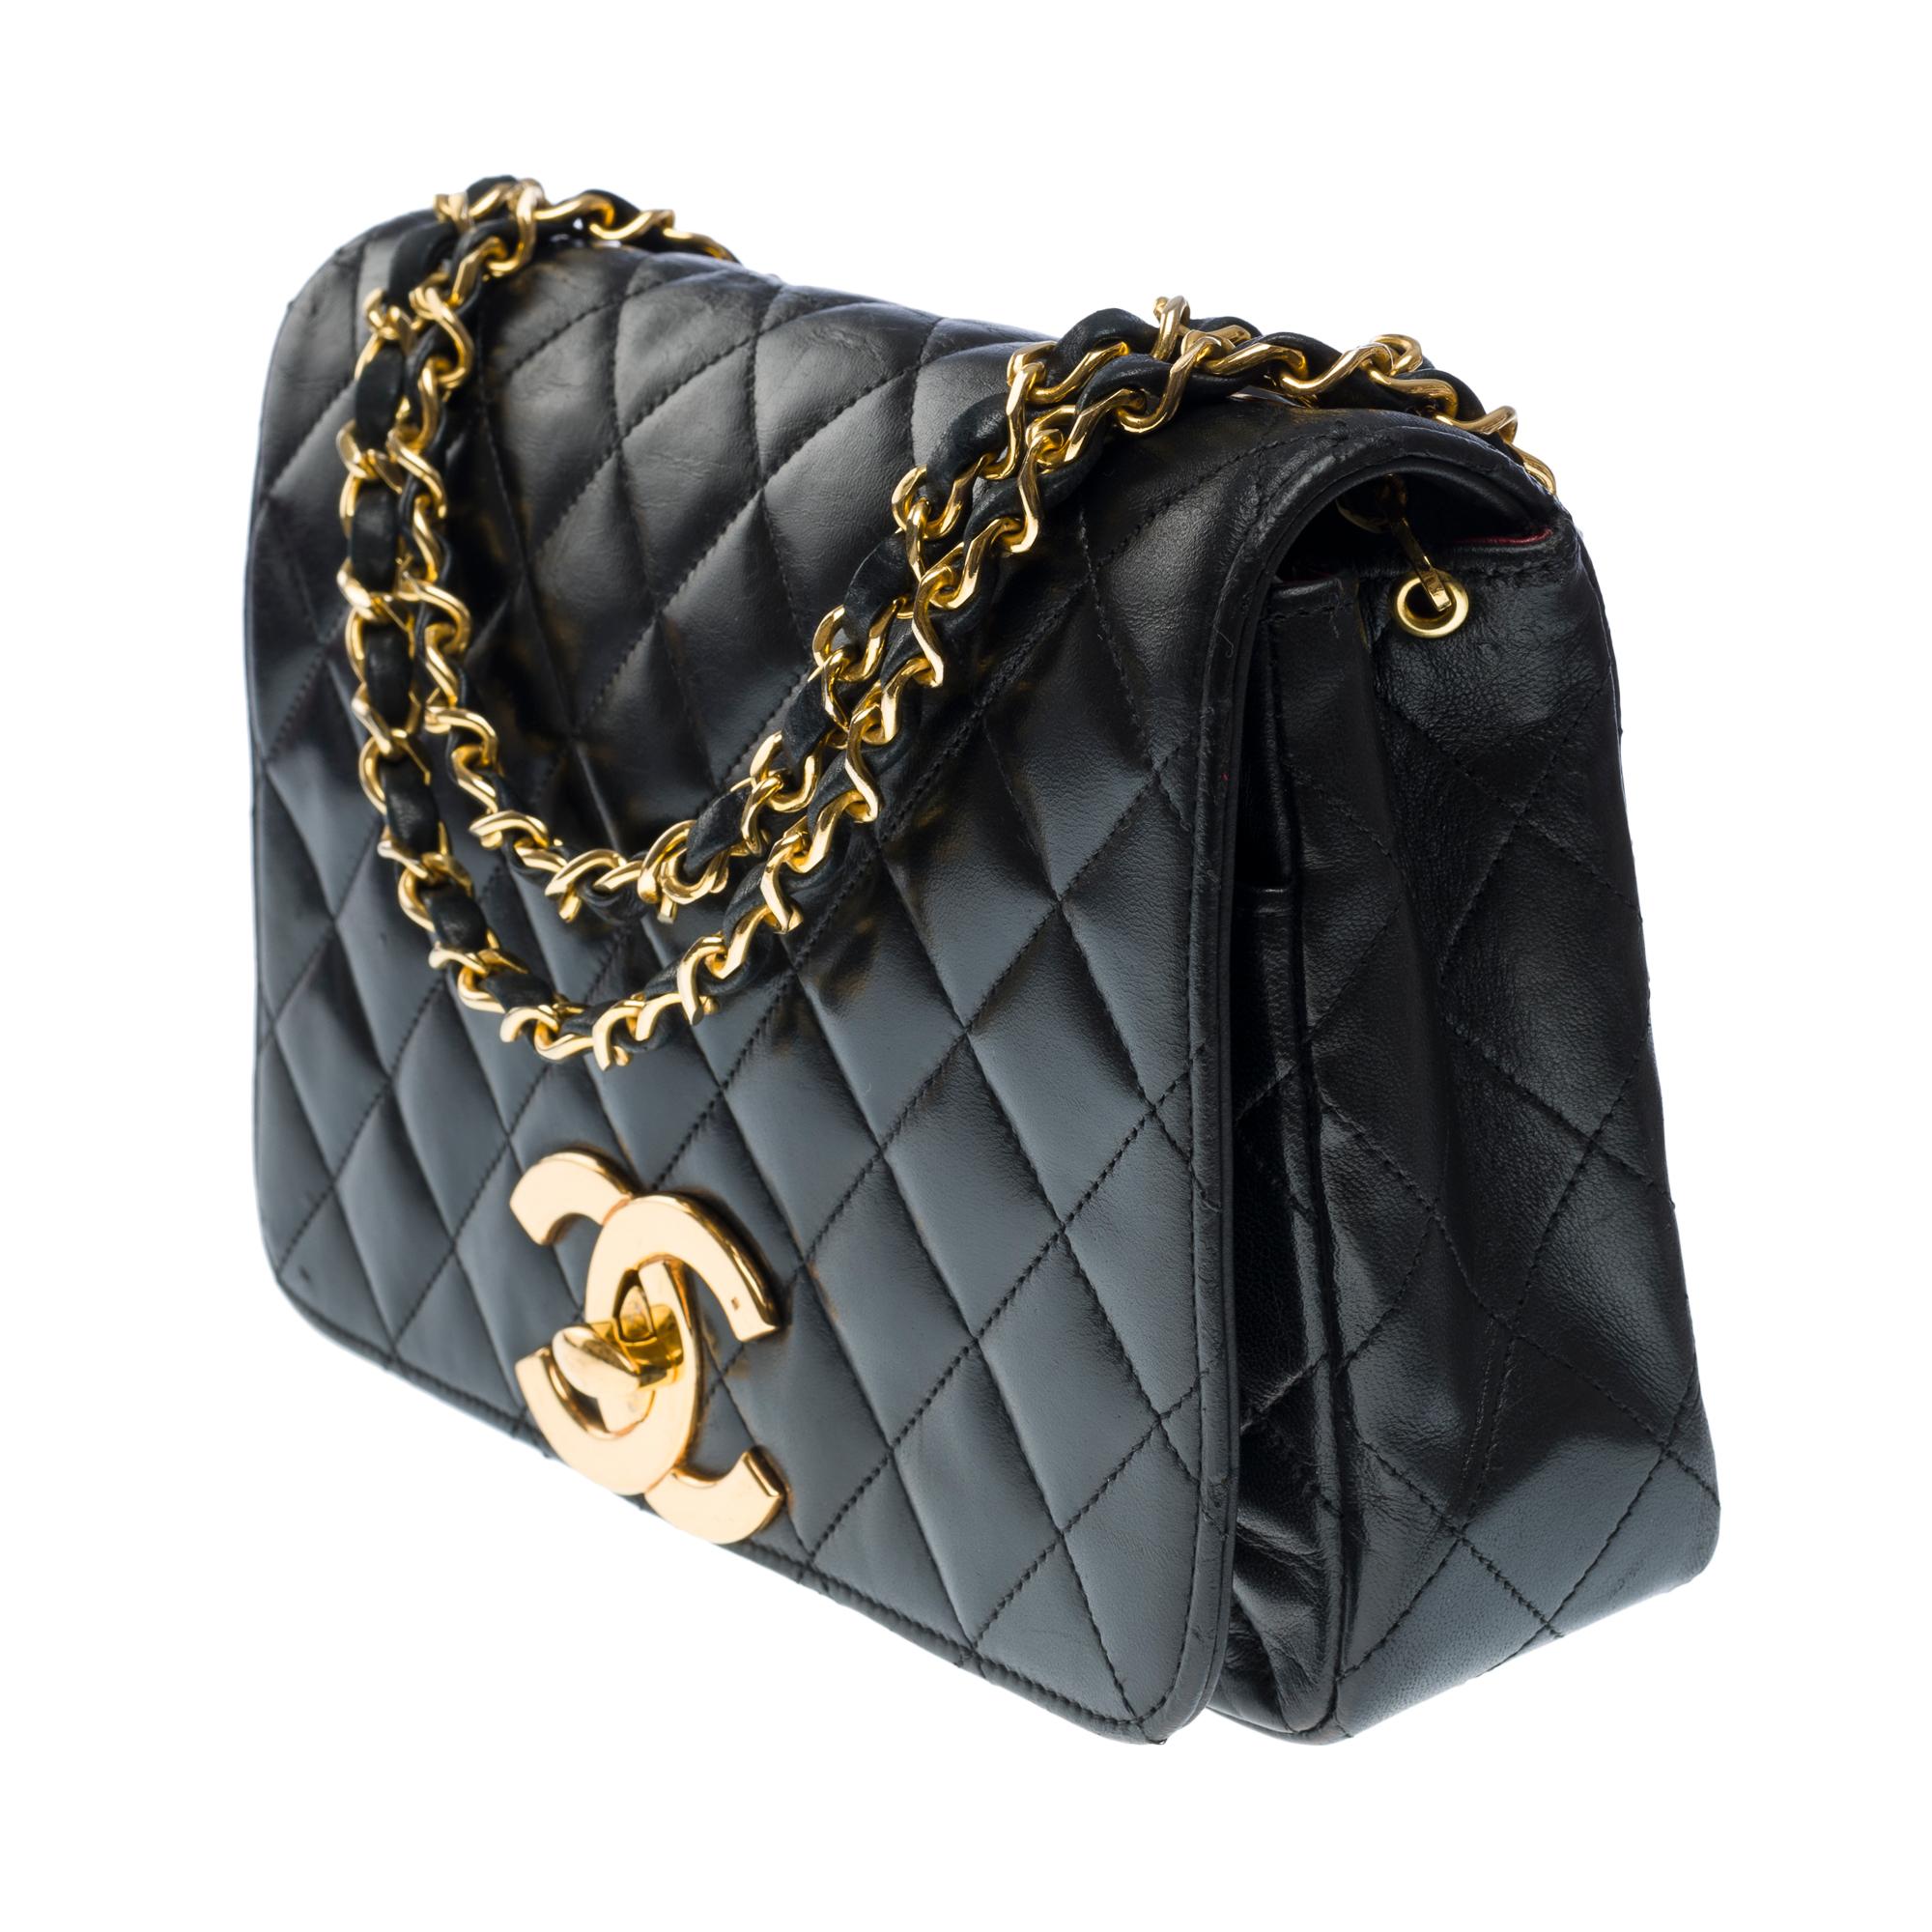 Chanel Classic Full Flap shoulder bag in black quilted lambskin leather, GHW For Sale 1